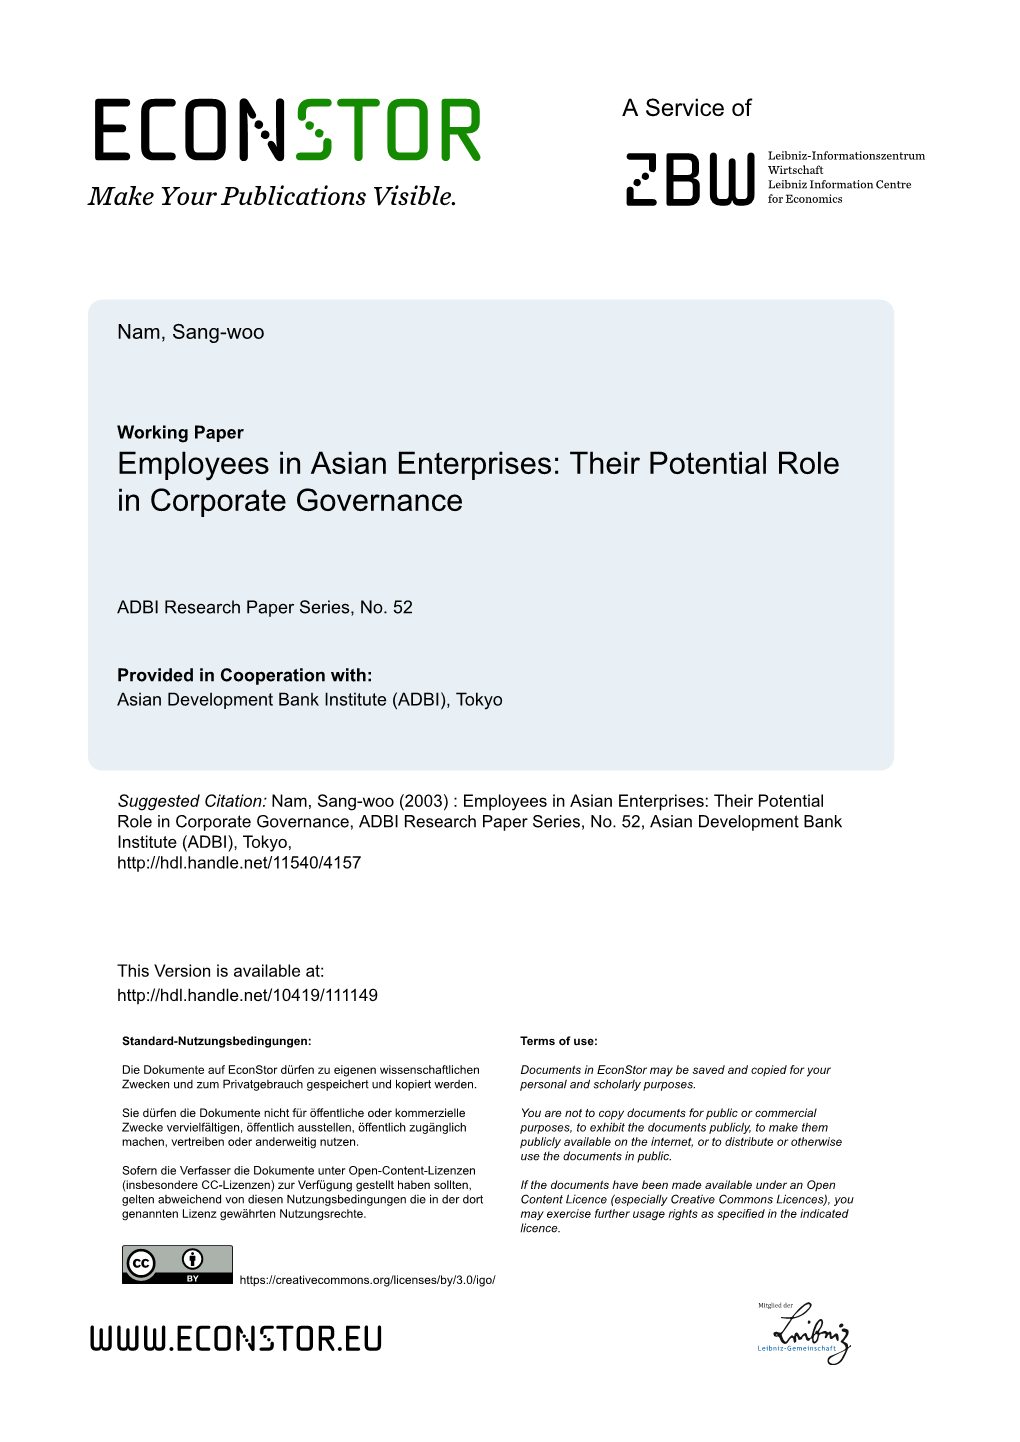 Employees in Asian Enterprises: Their Potential Role in Corporate Governance